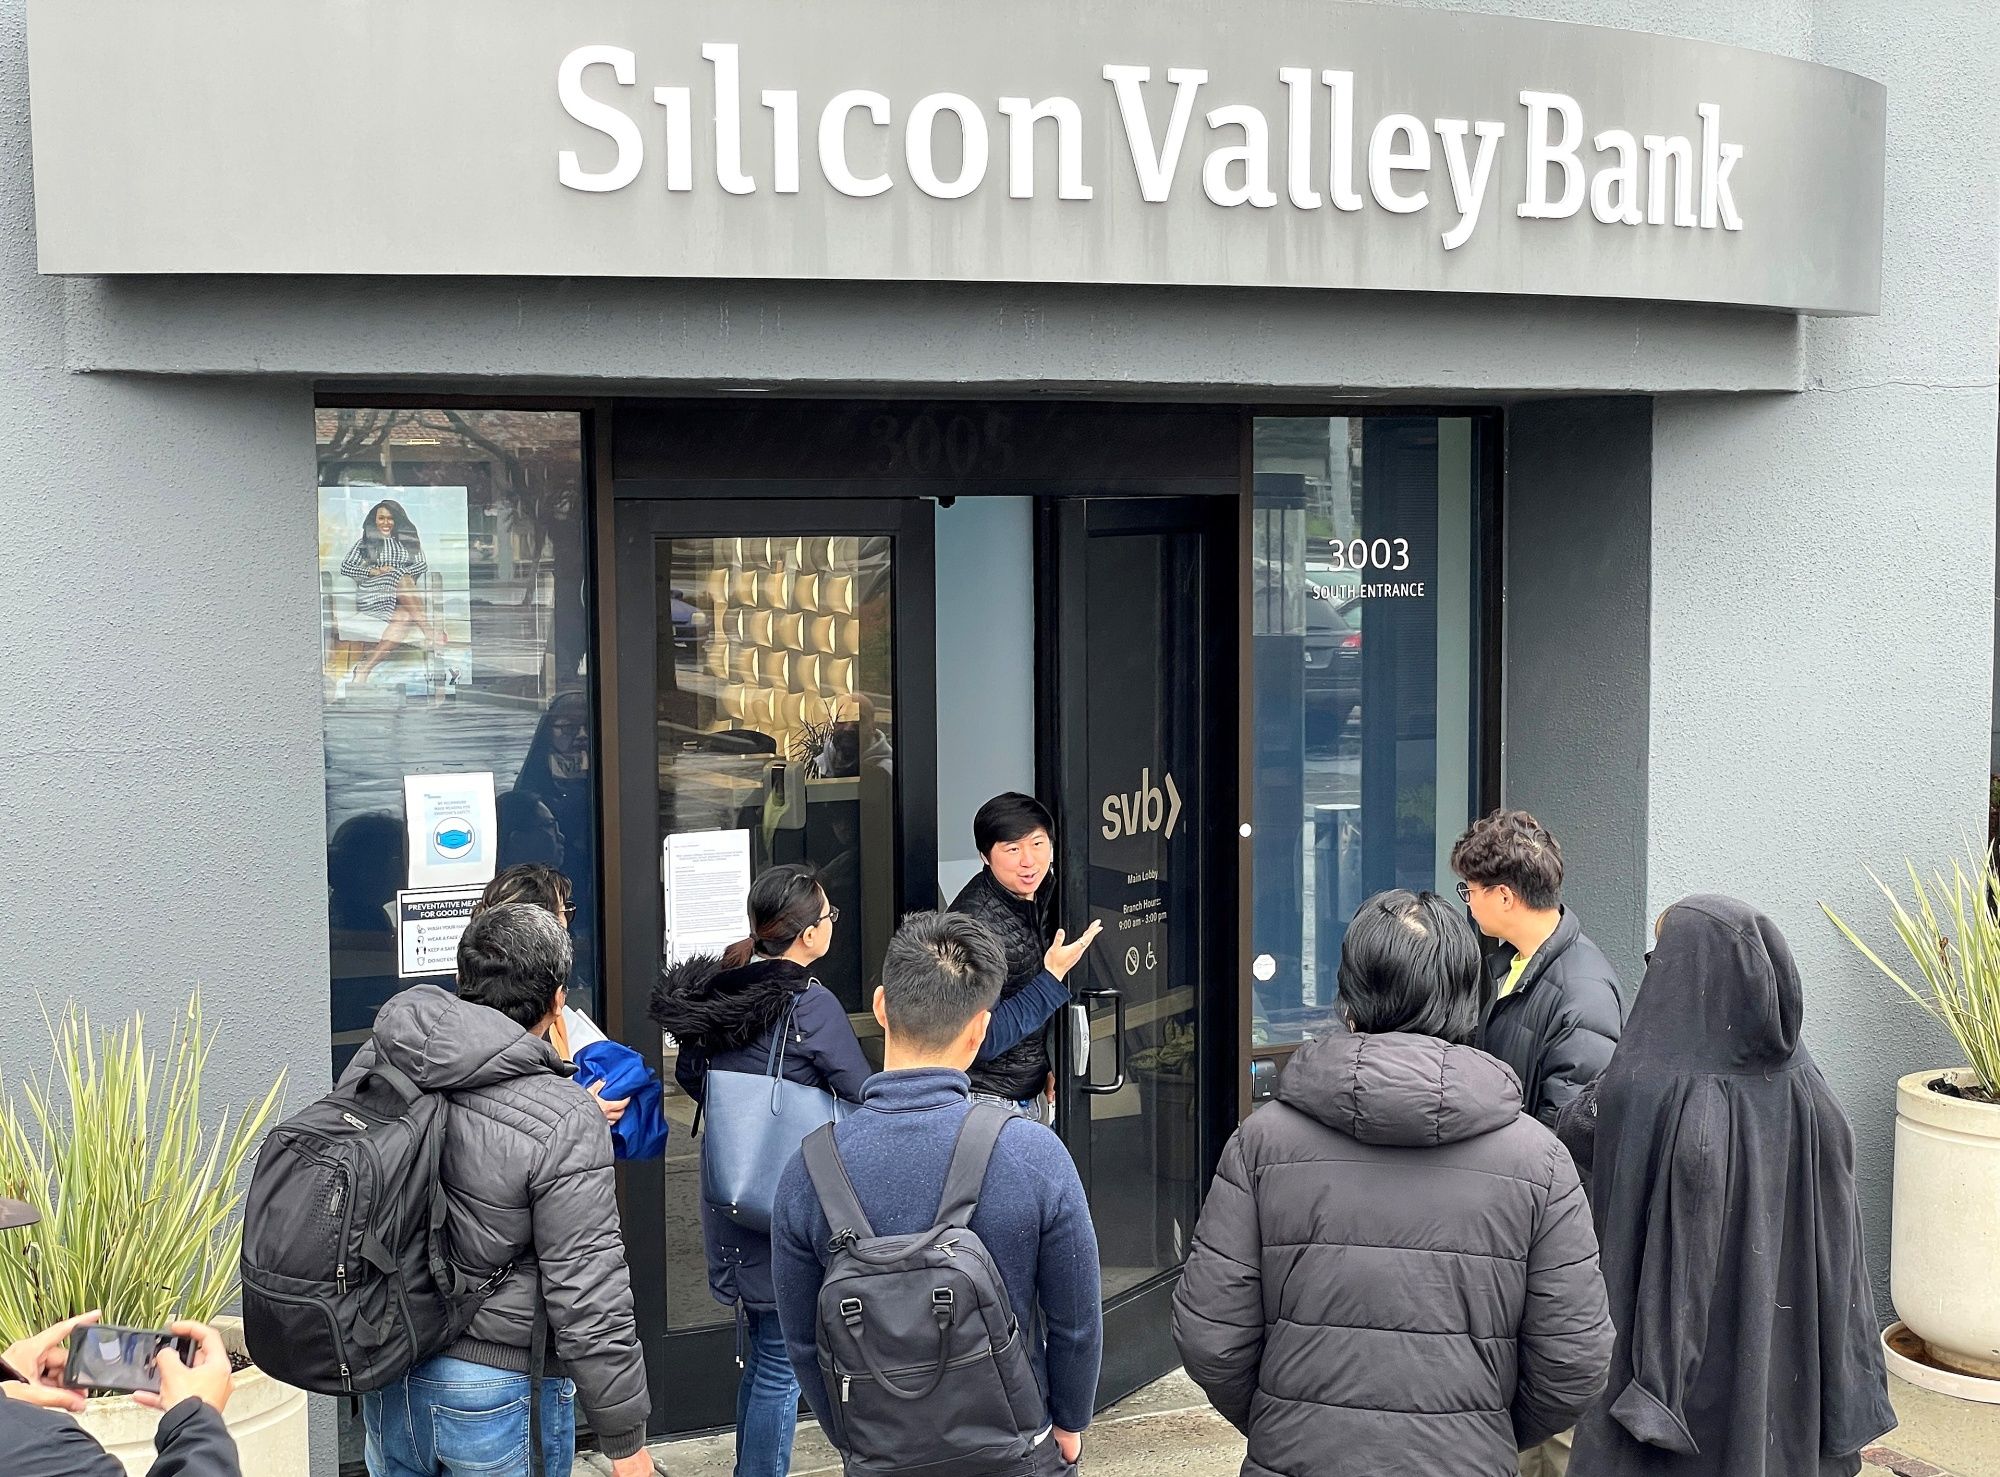 People are told the Silicon Valley Bank (SVB) headquarters is closed.